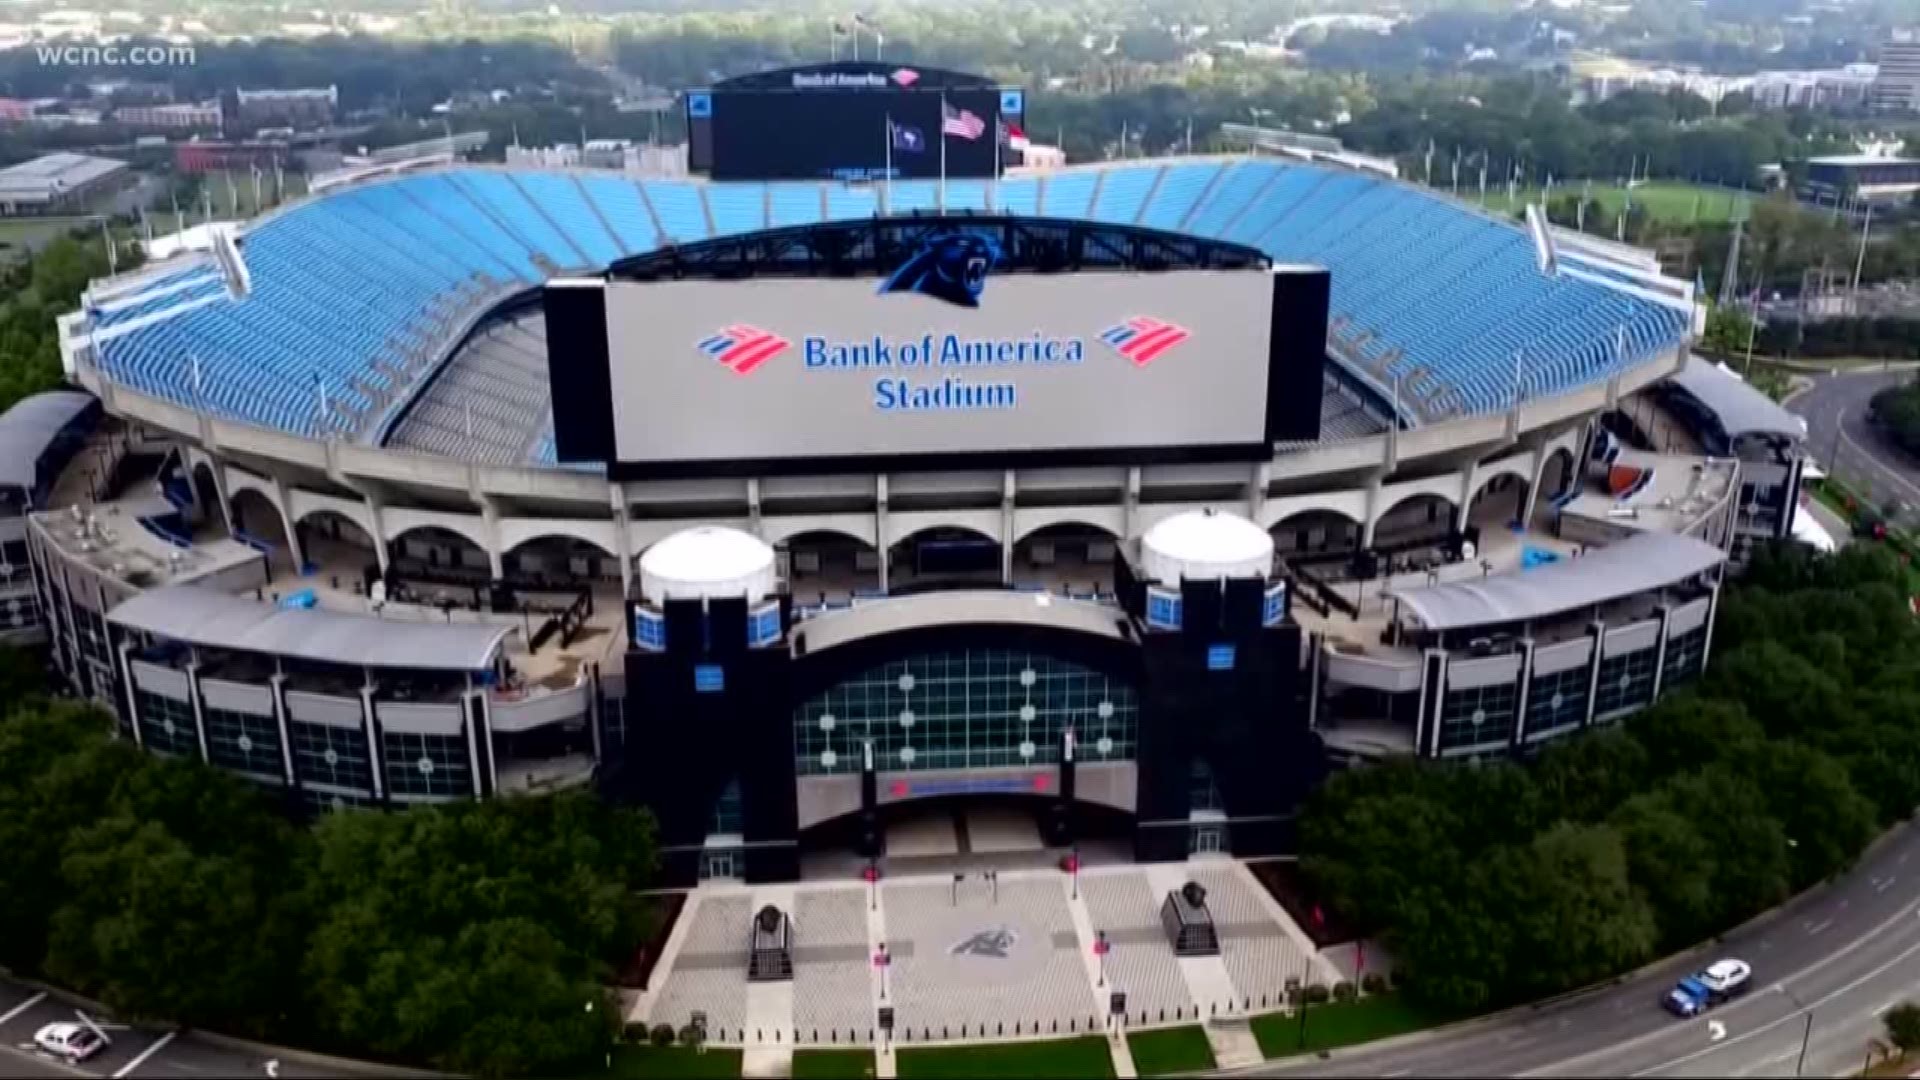 Less than a week after Gov. Henry McMaster met with Carolina Panthers owner David Tepper, South Carolina leaders are working on two bills that would incentivize the team for moving its headquarters and practice facility to the Palmetto State.